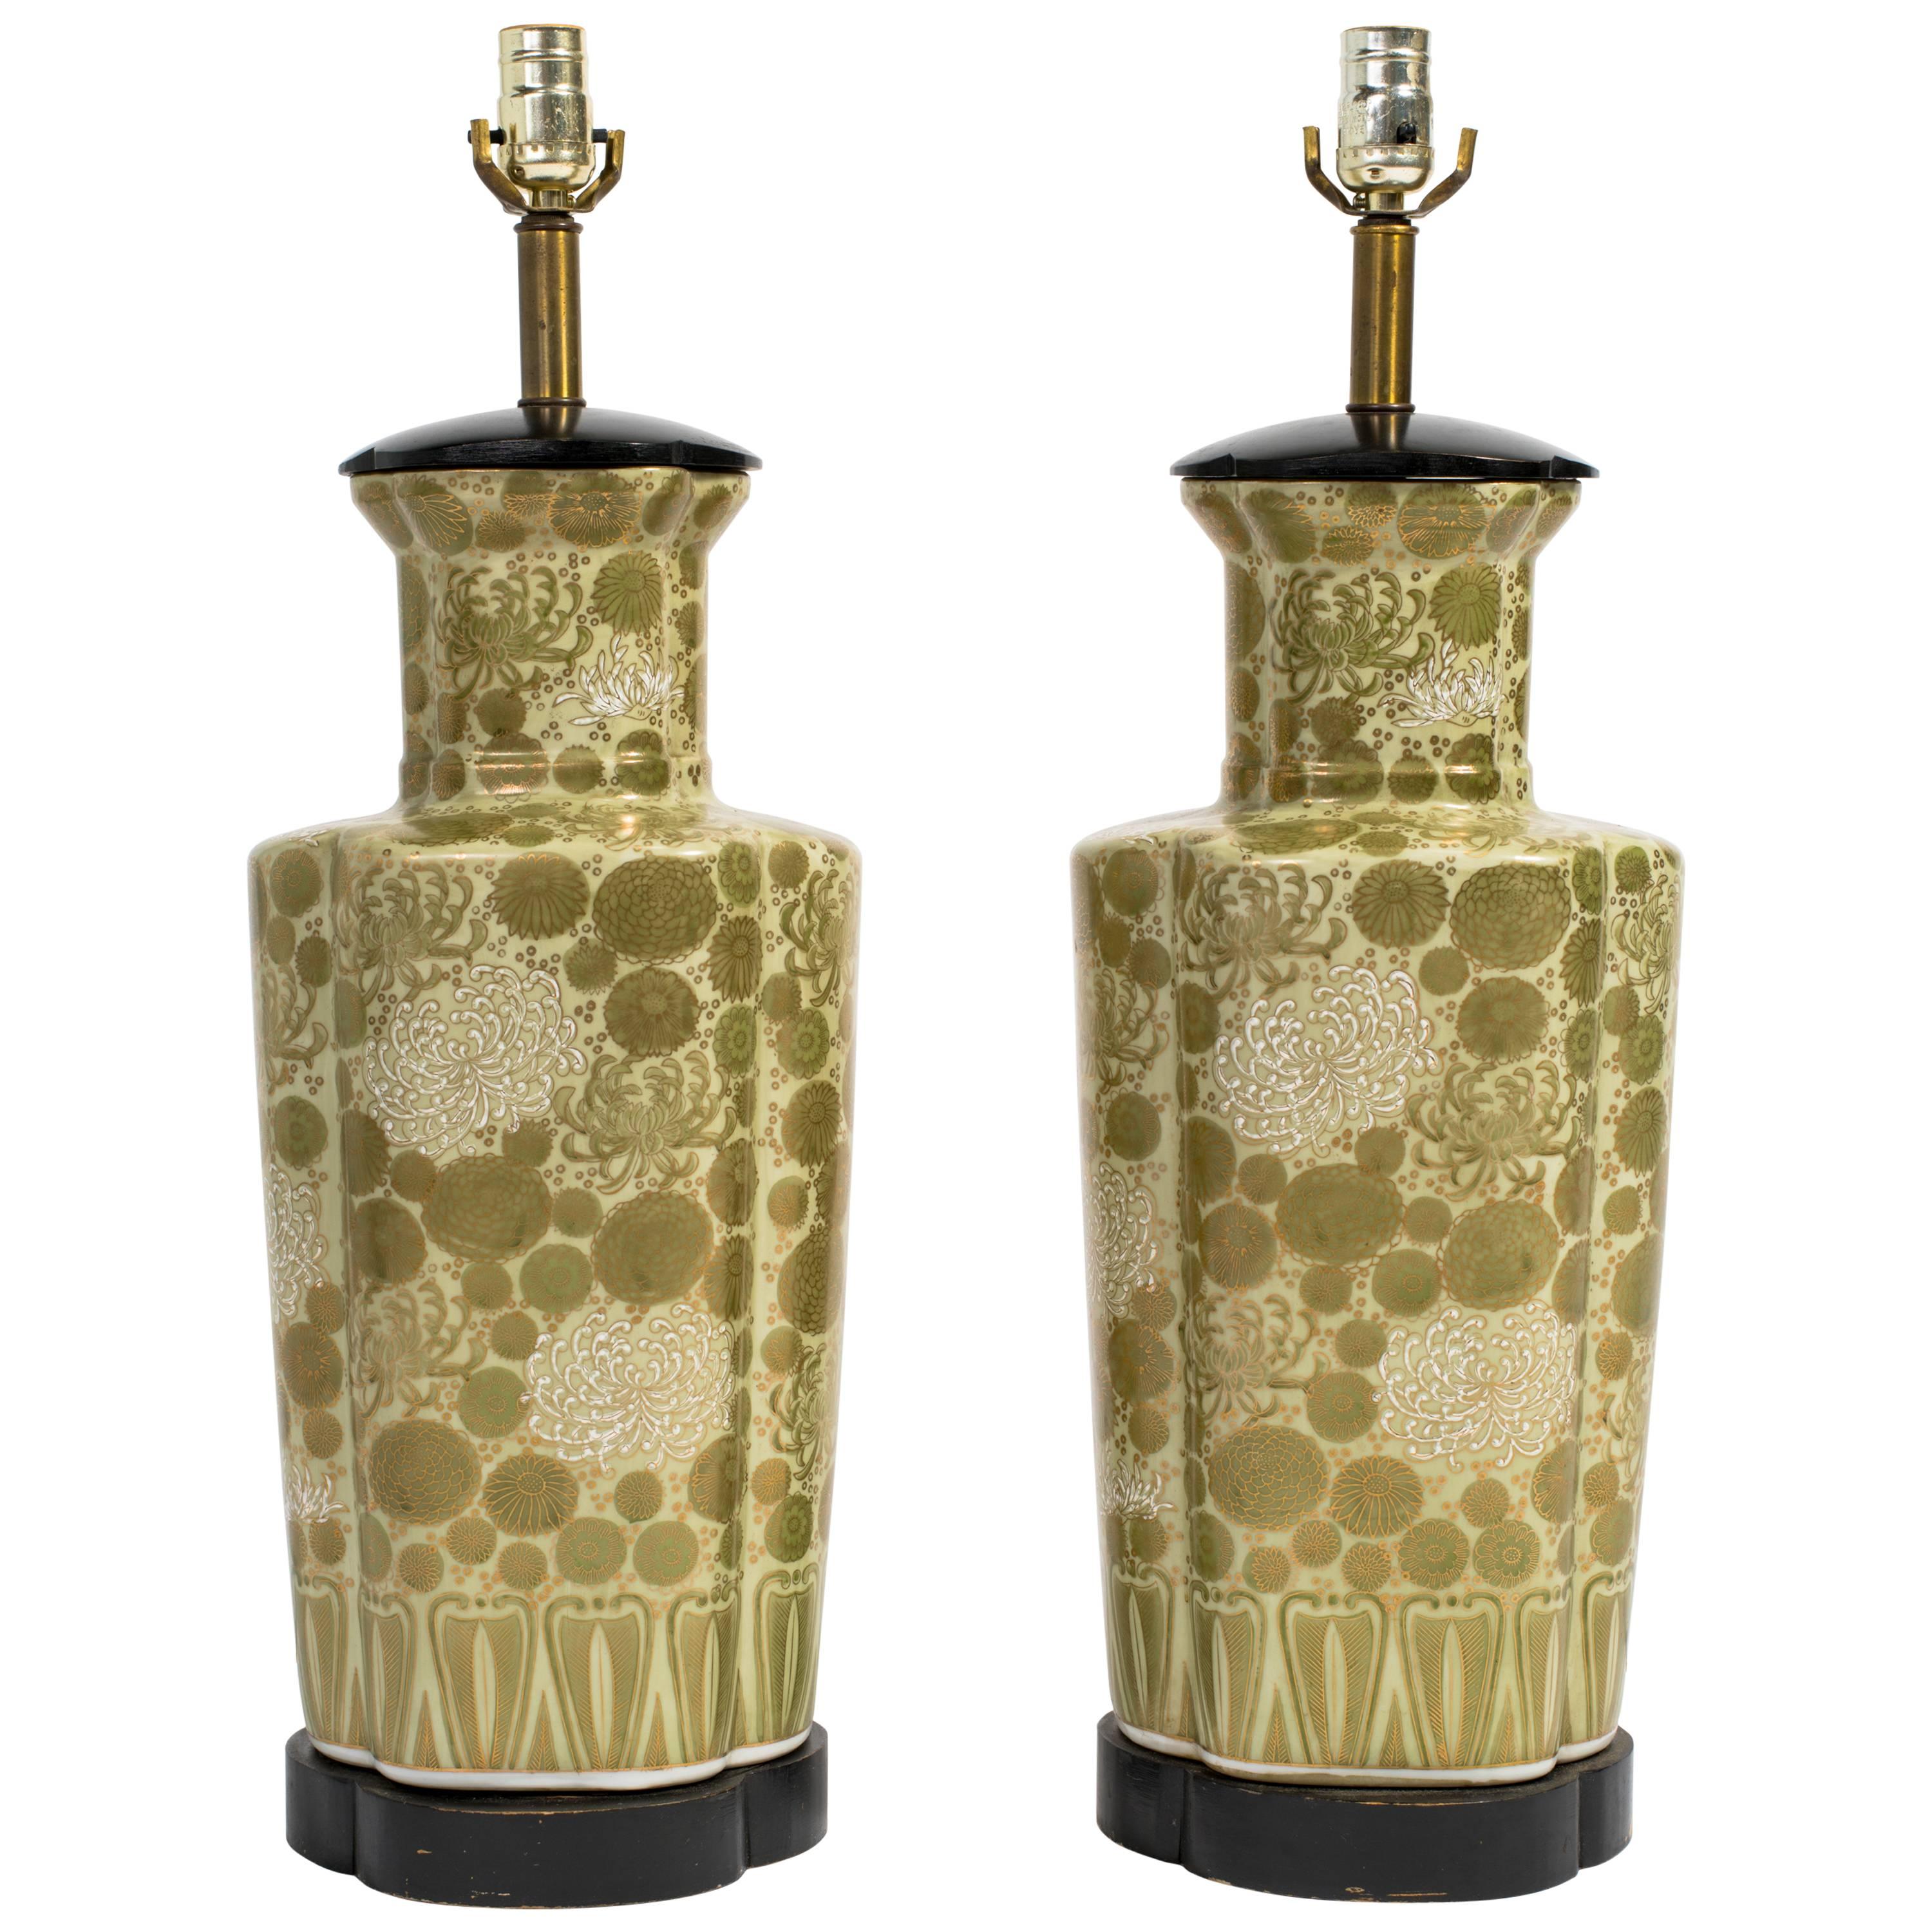 Pair of Asian Style Hand-Painted Ceramic Lamps